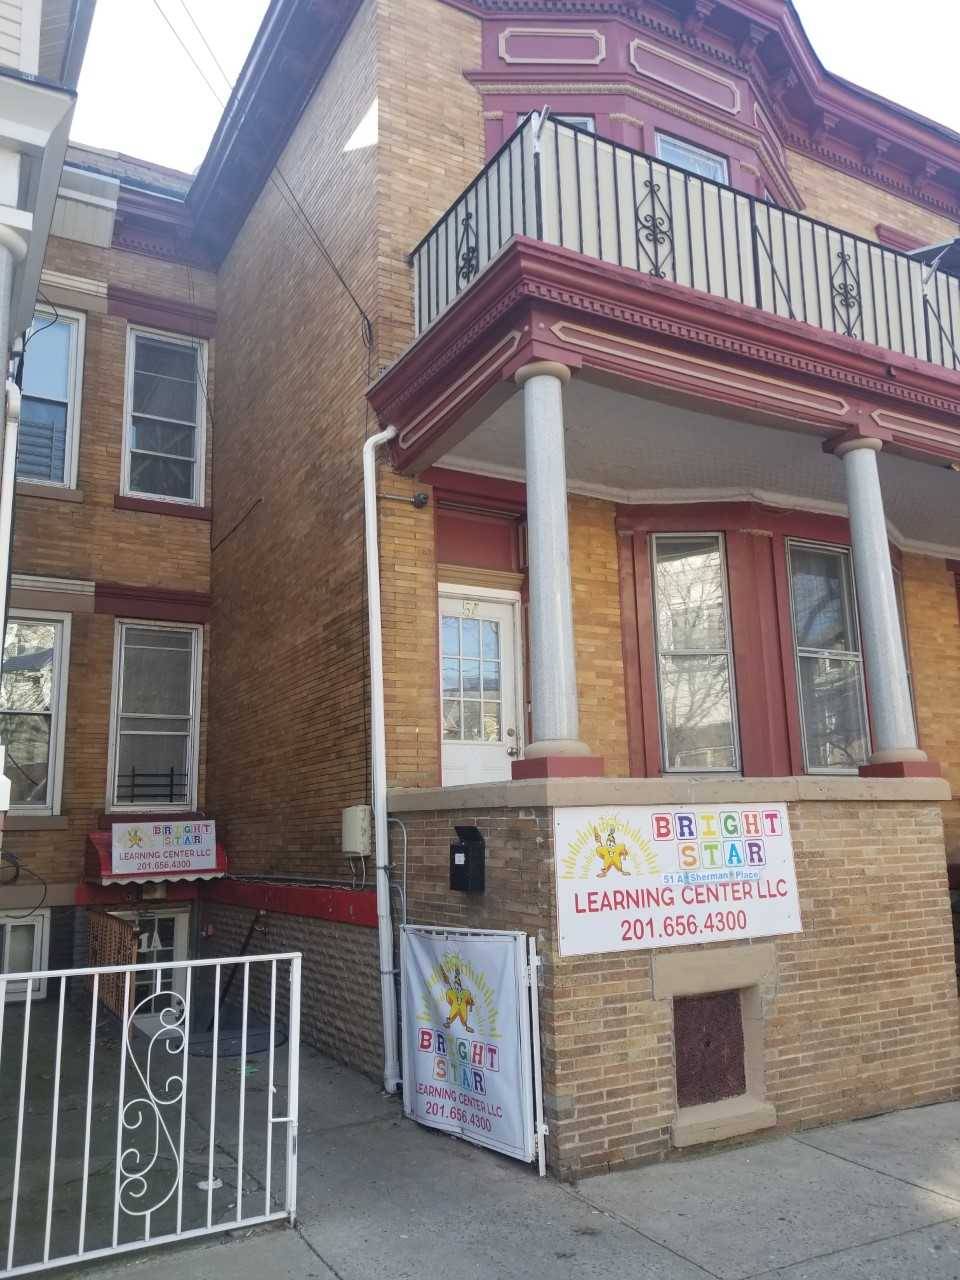 Investment property in JC Heights: Retail + 2 family